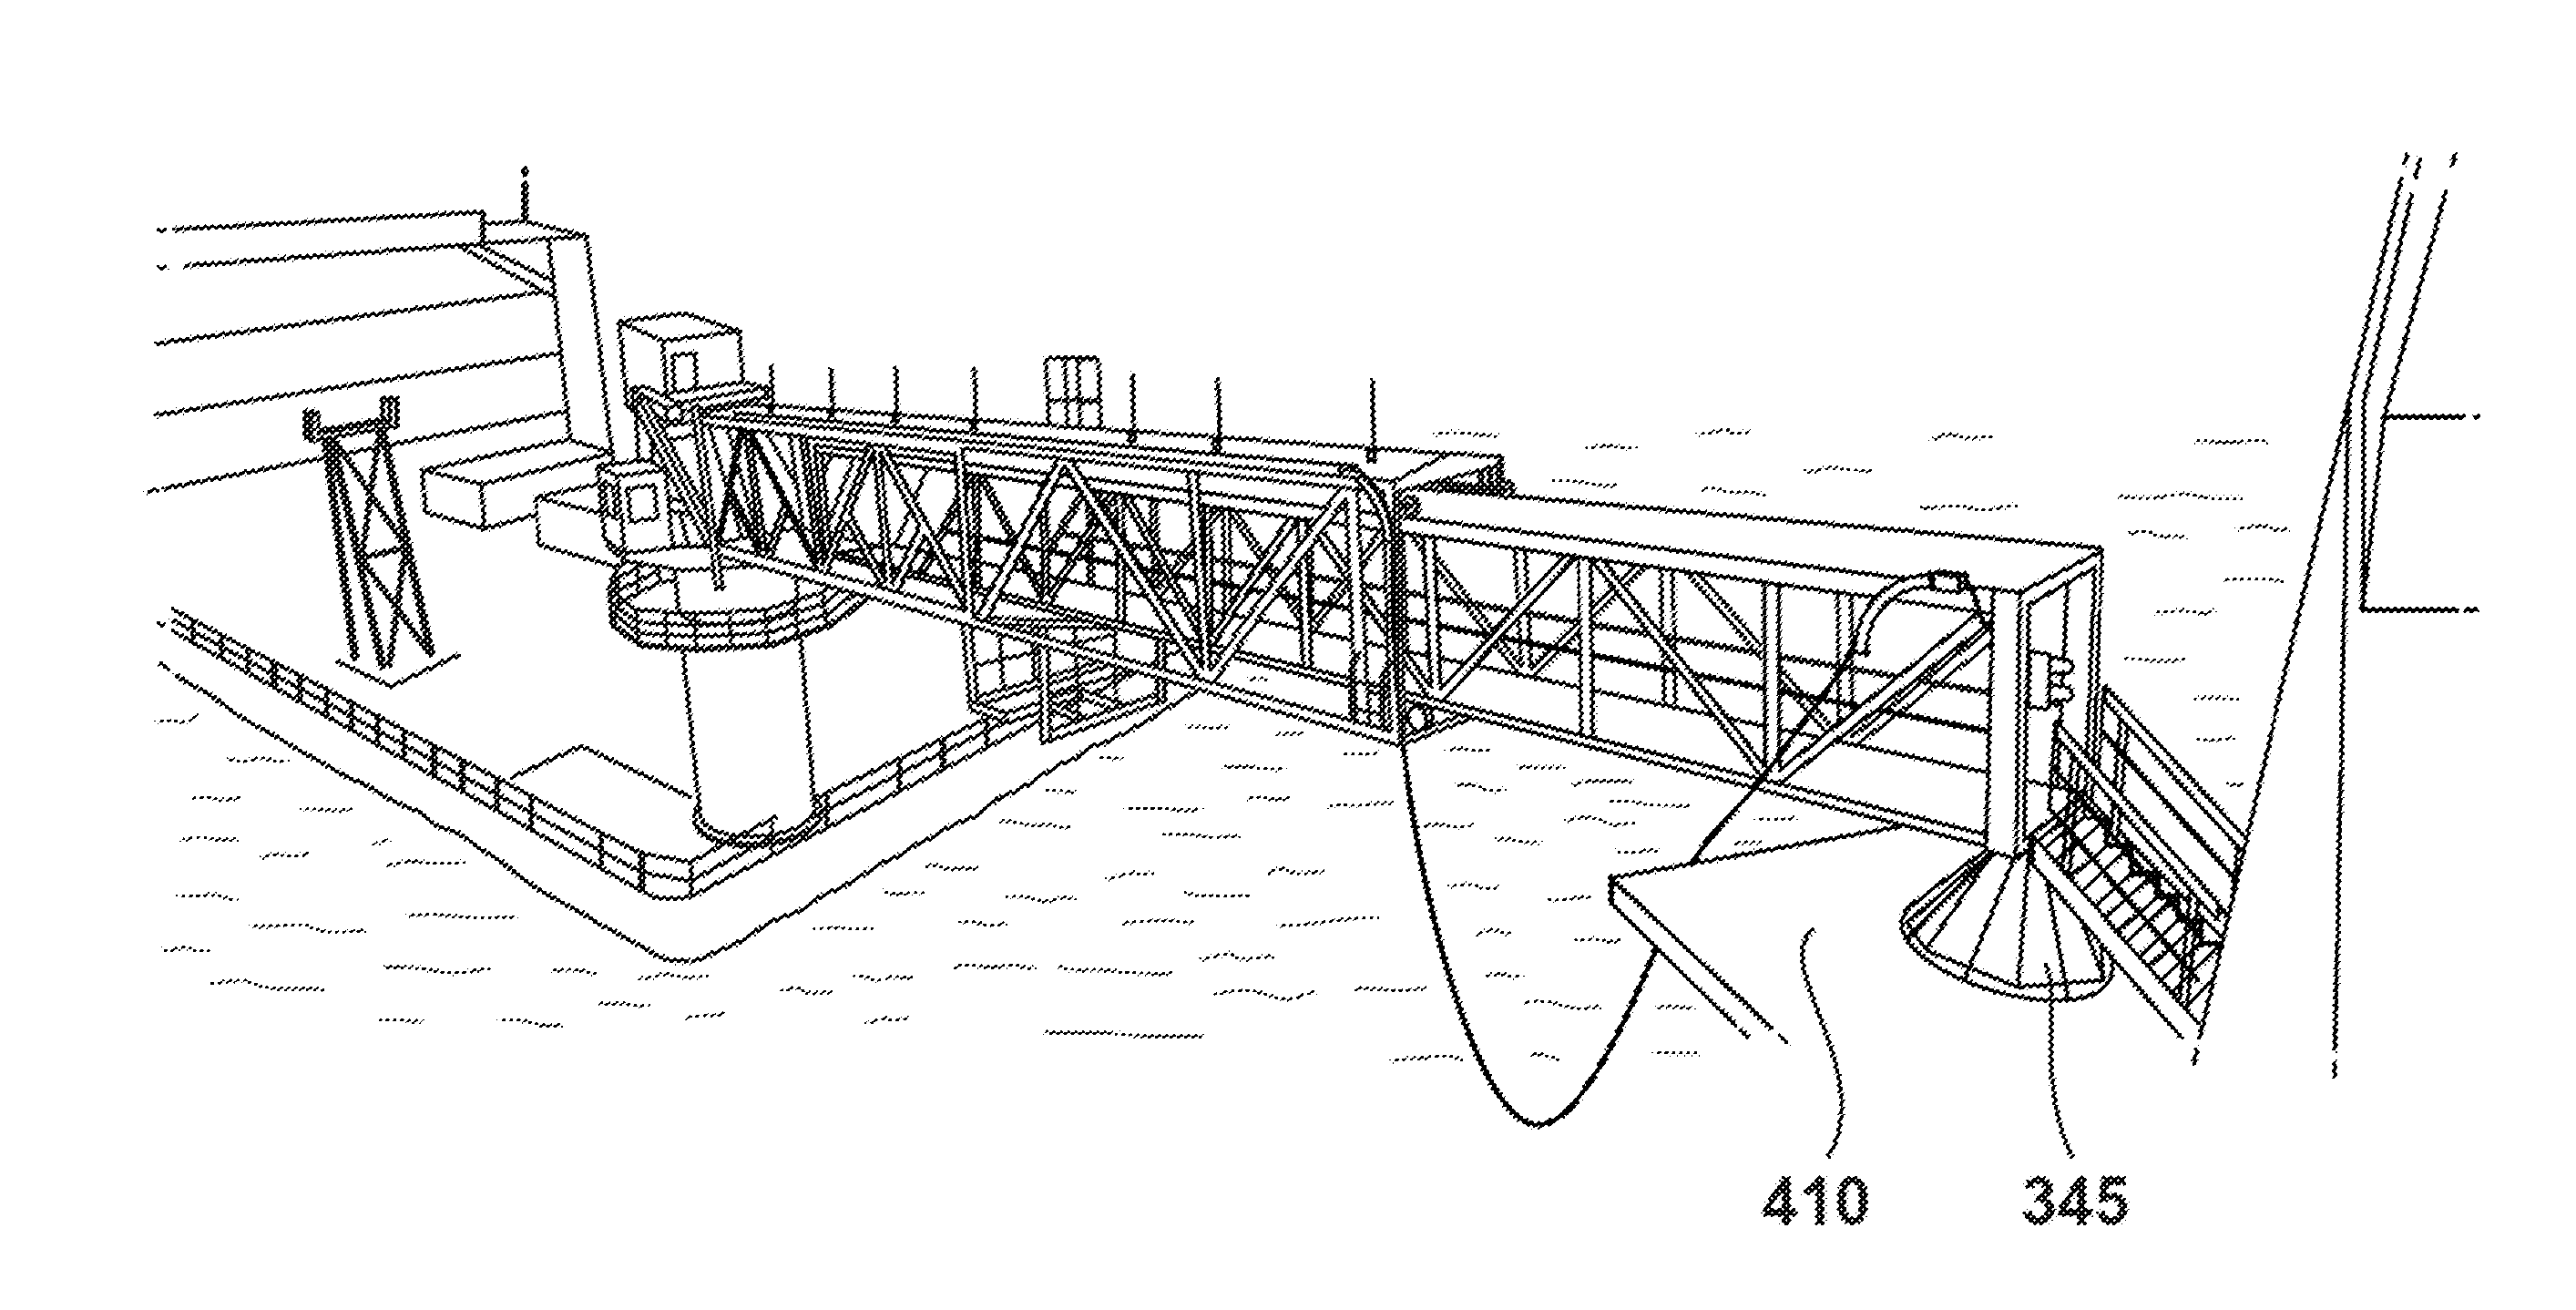 Apparatus and method for providing active motion compensation control of an articulated gangway